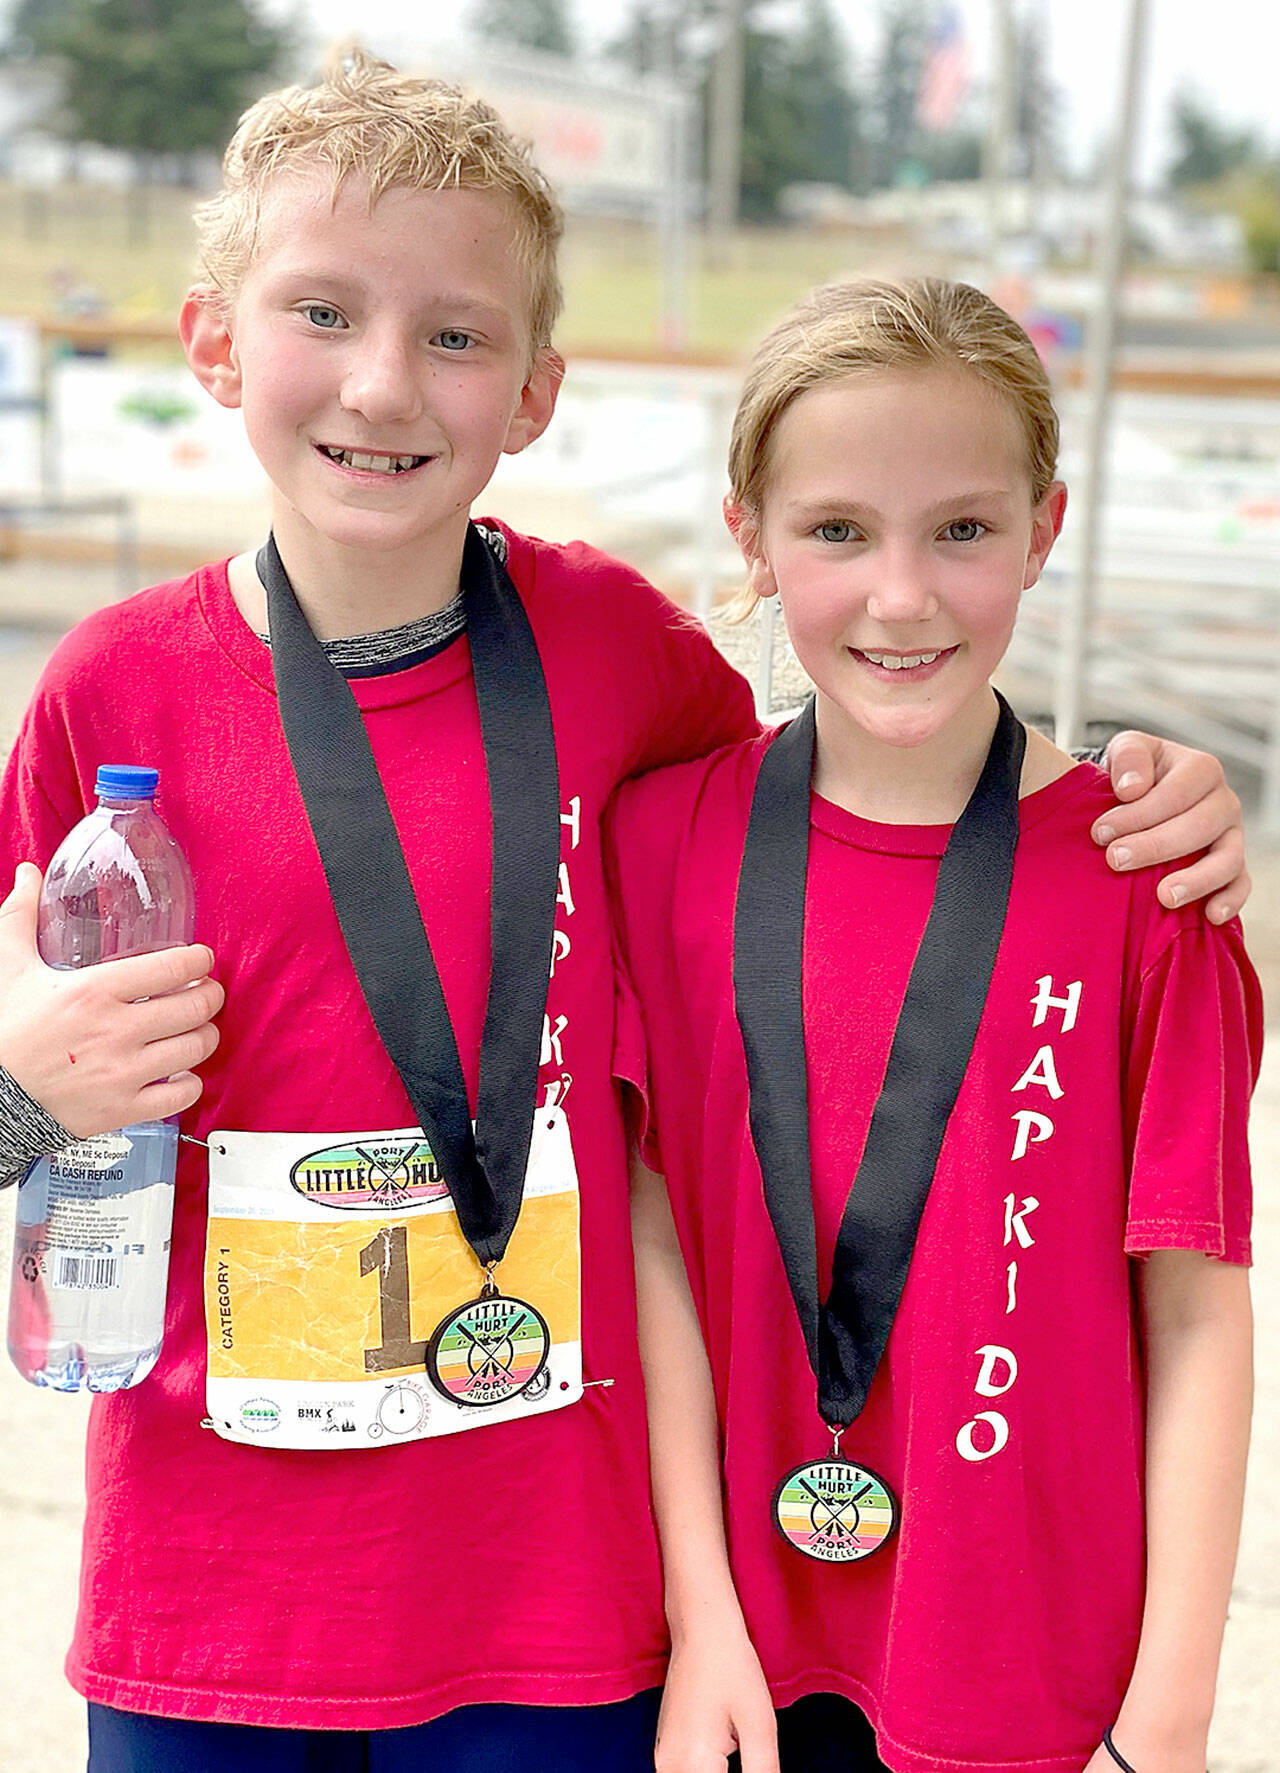 William and Delaney MacFarlane competed in the Little Hurt on Sunday. (Meghan Ventura/Olympic Peninsula Rowing Association)